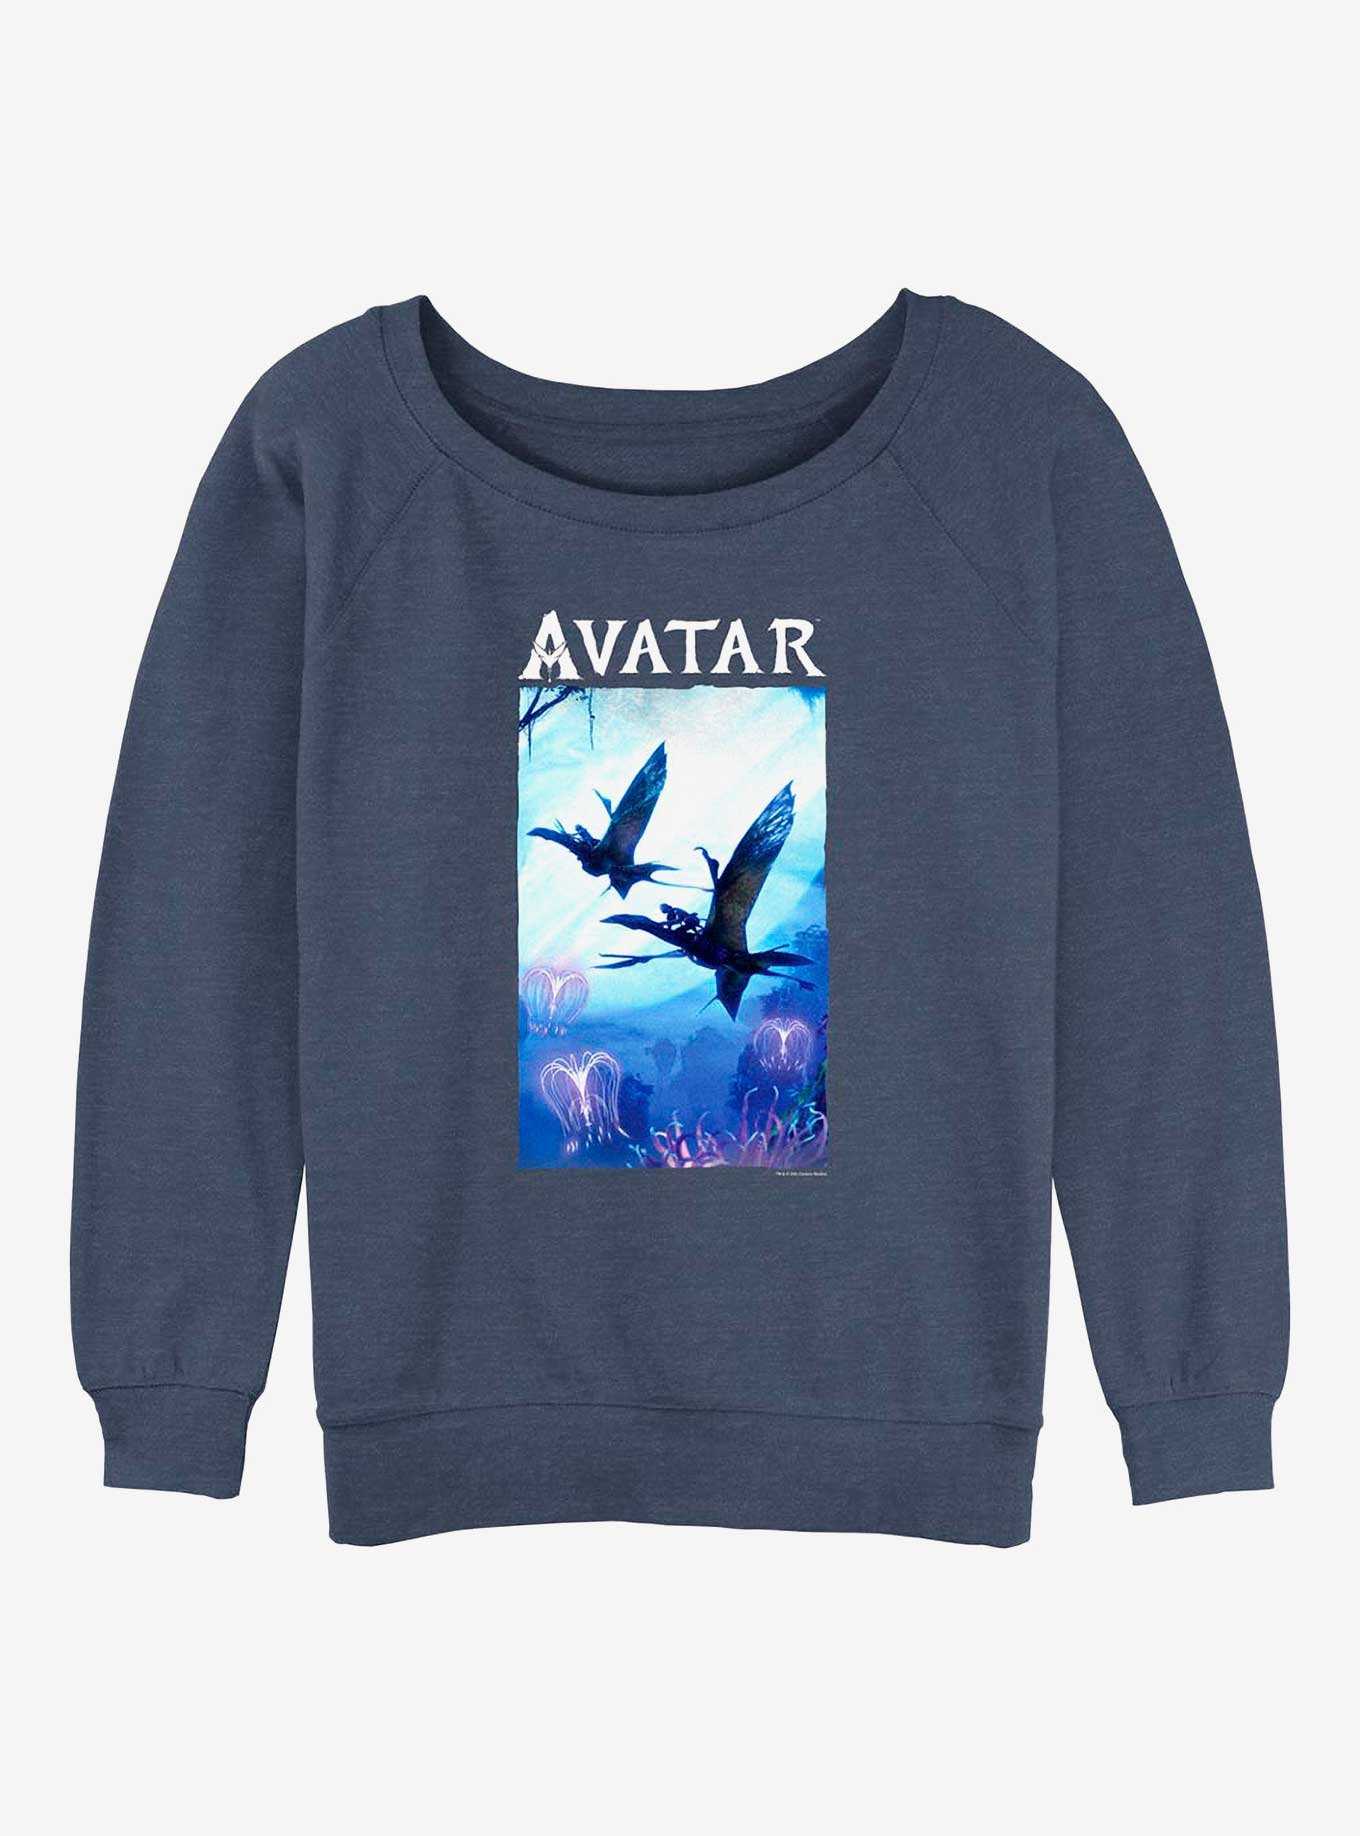 Avatar: The Way of Water Air Time Poster Girls Slouchy Sweatshirt, , hi-res